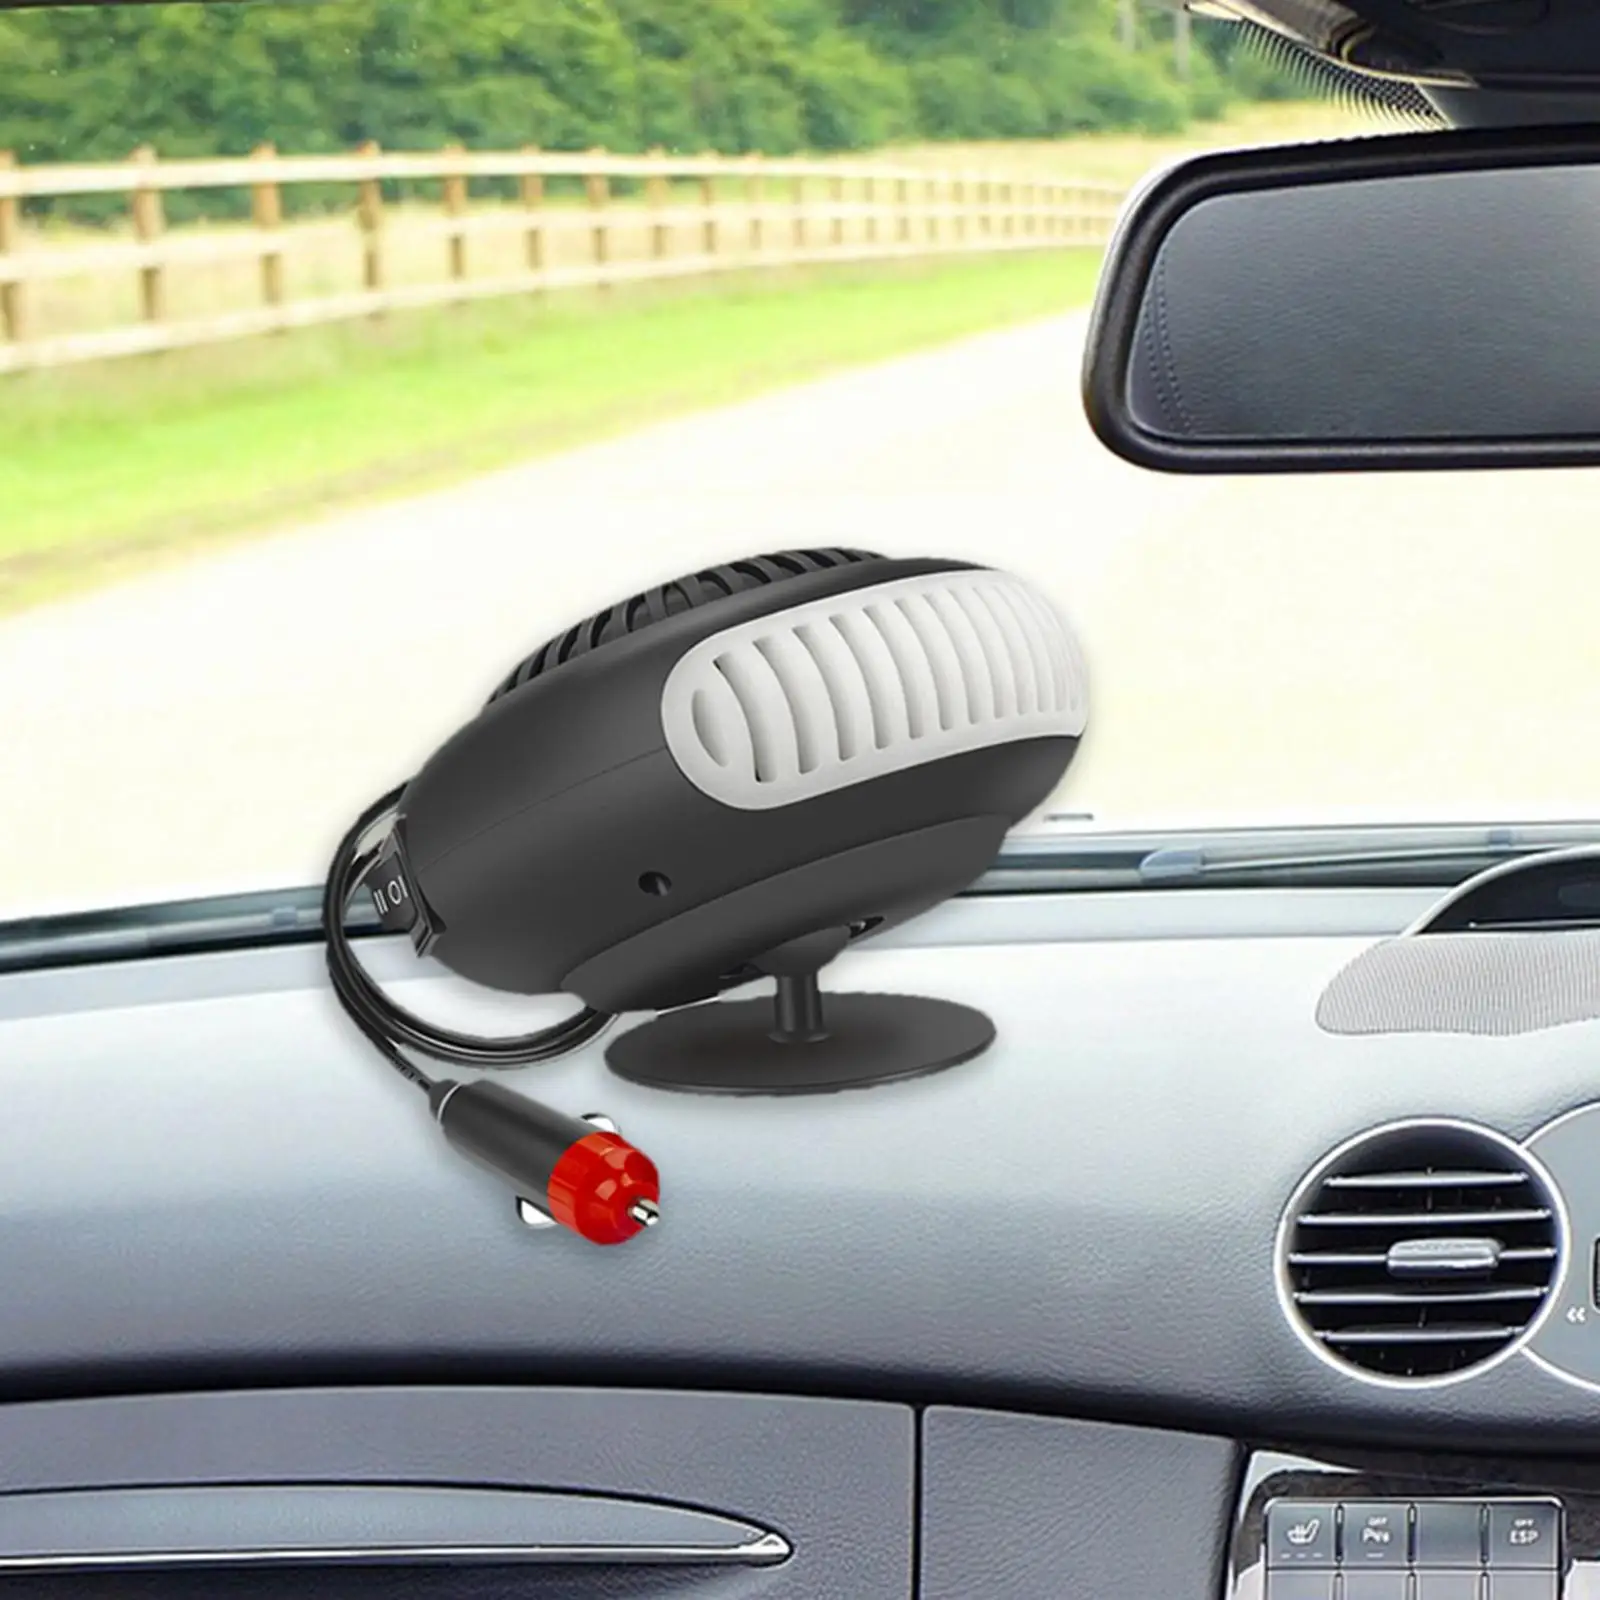 Portable Car Heater Demister Interior Accessories Electric Defogger Defroster 2 in 1 Auto Heater Warmer for SUV Cars Winter